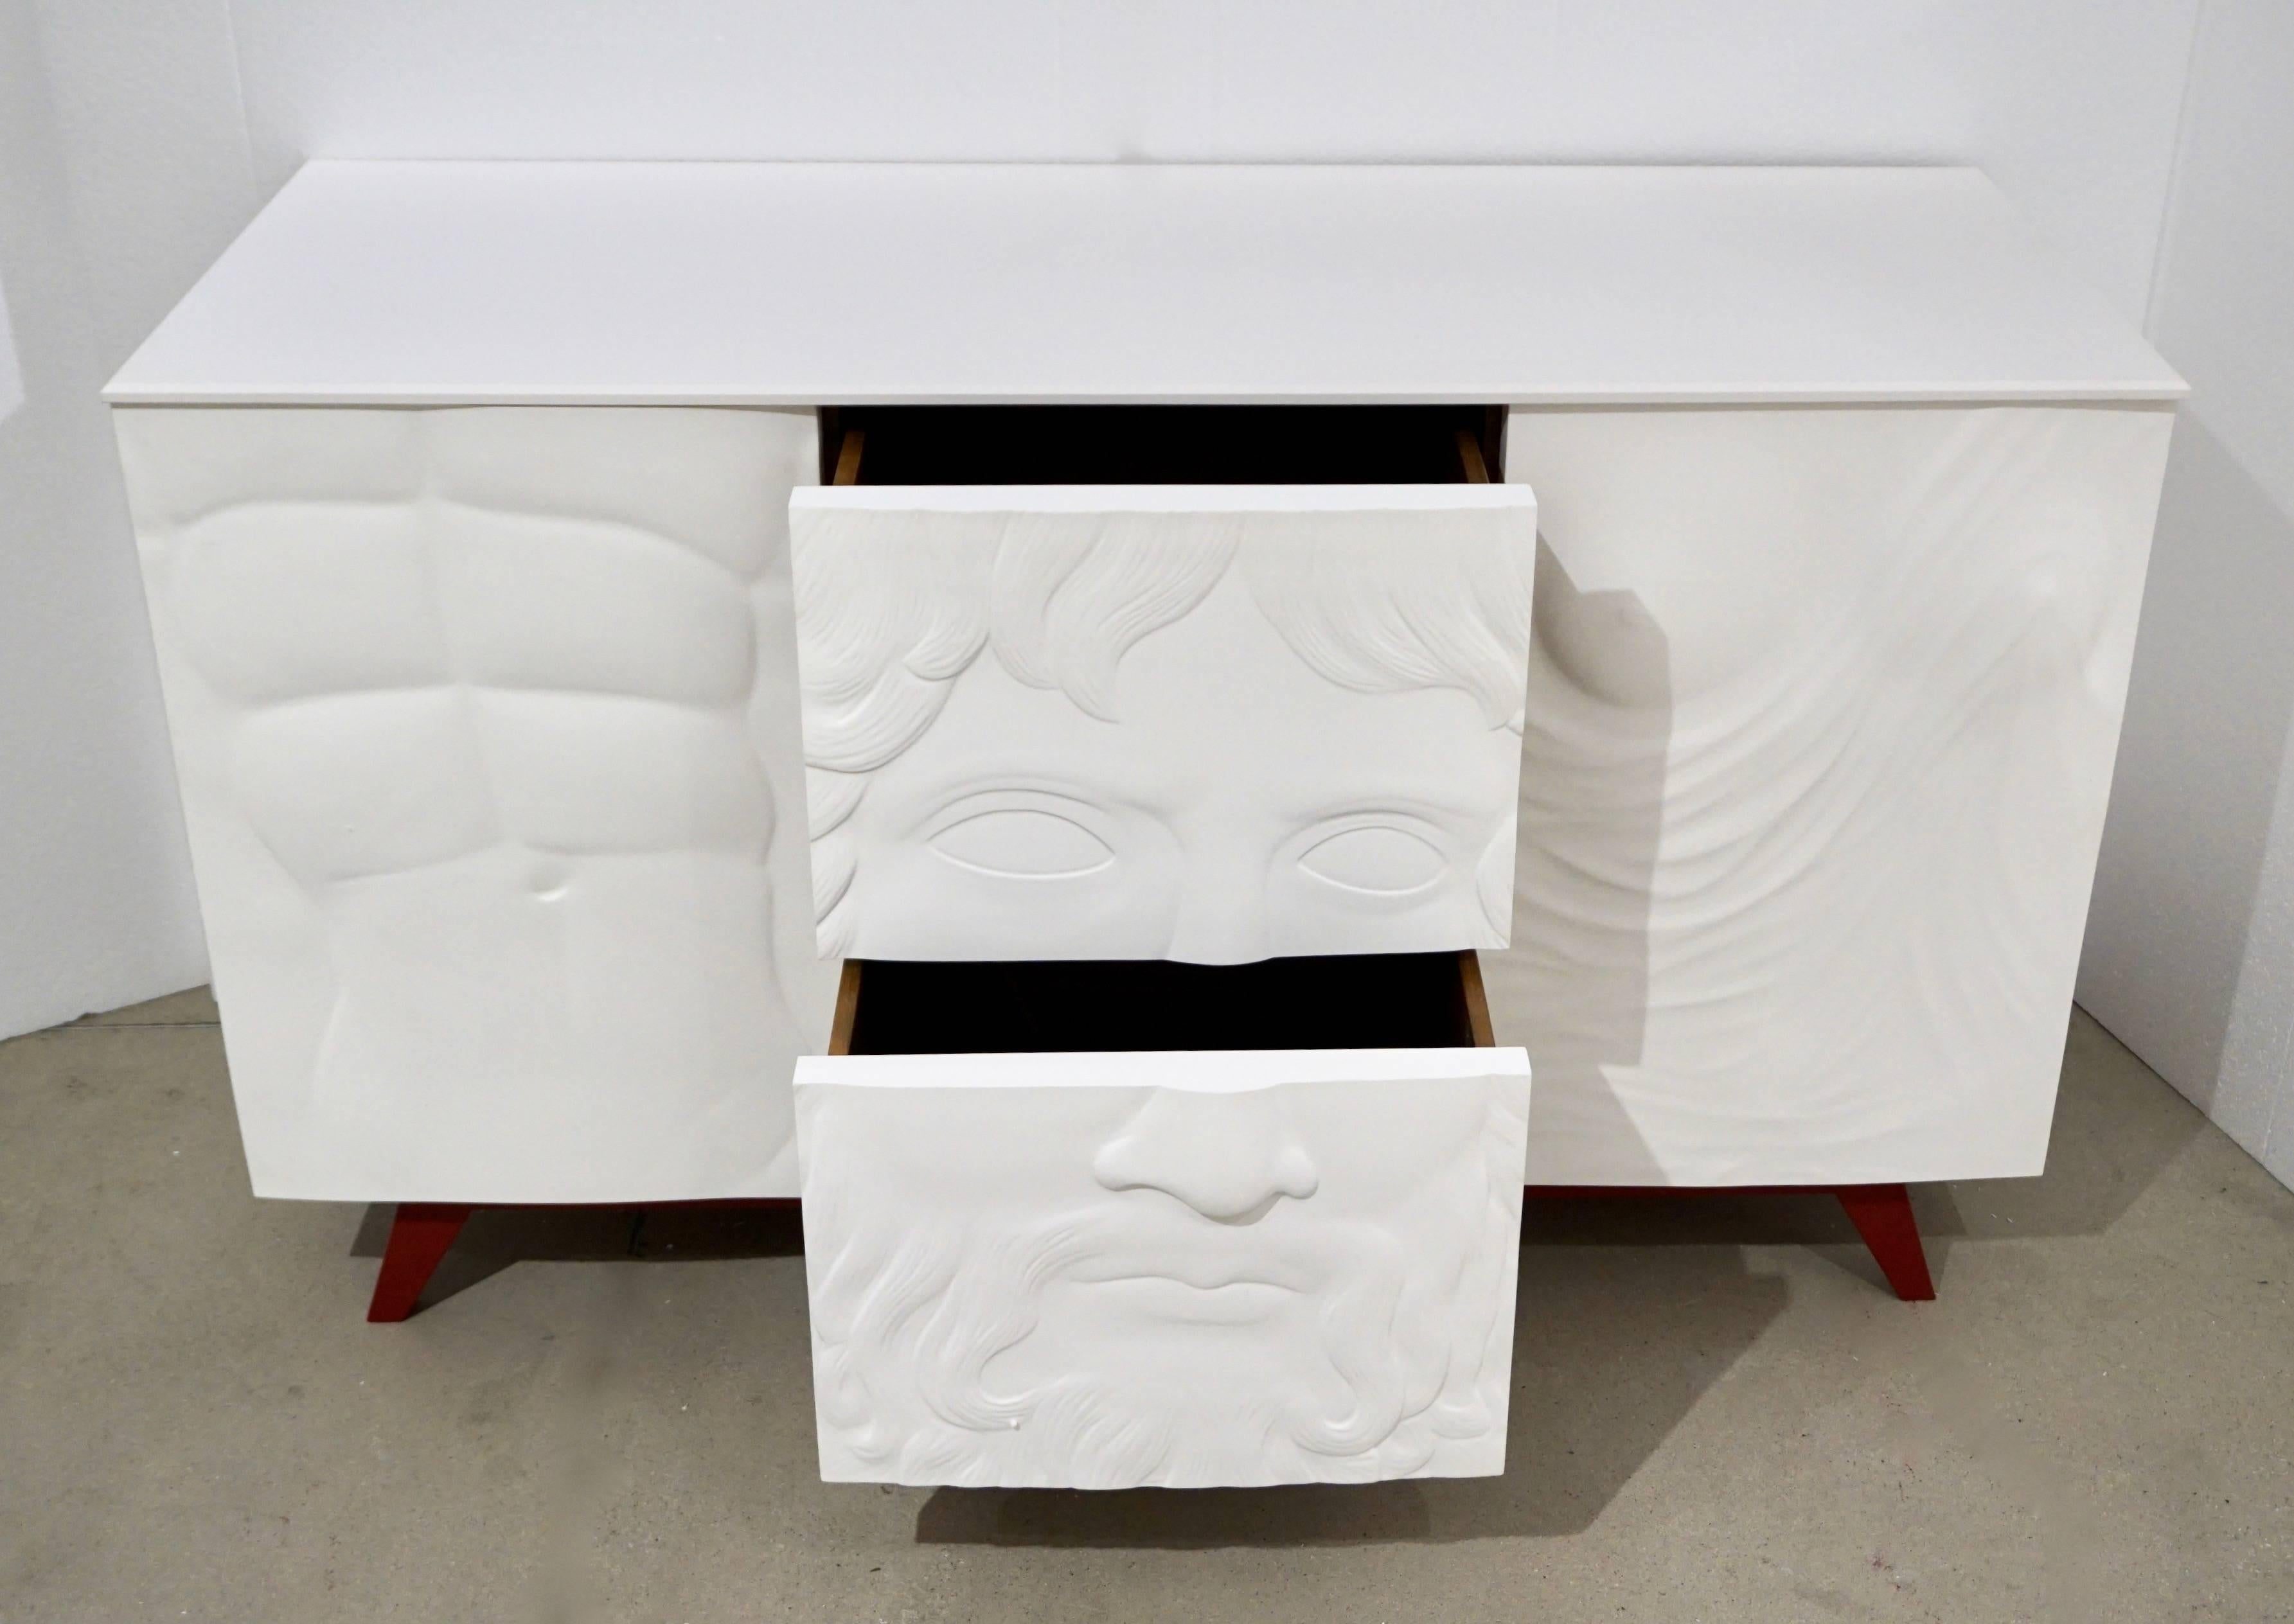 Organic Modern Contemporary Italian Design White Sideboard or Cabinet with Burgundy Wood Legs